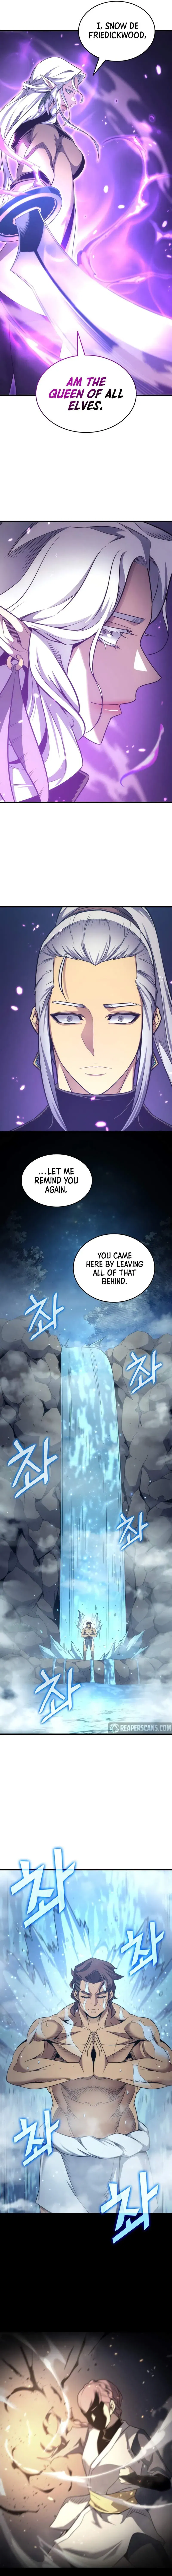 The Great Mage Returns After 4000 Years Chapter 164 page 8